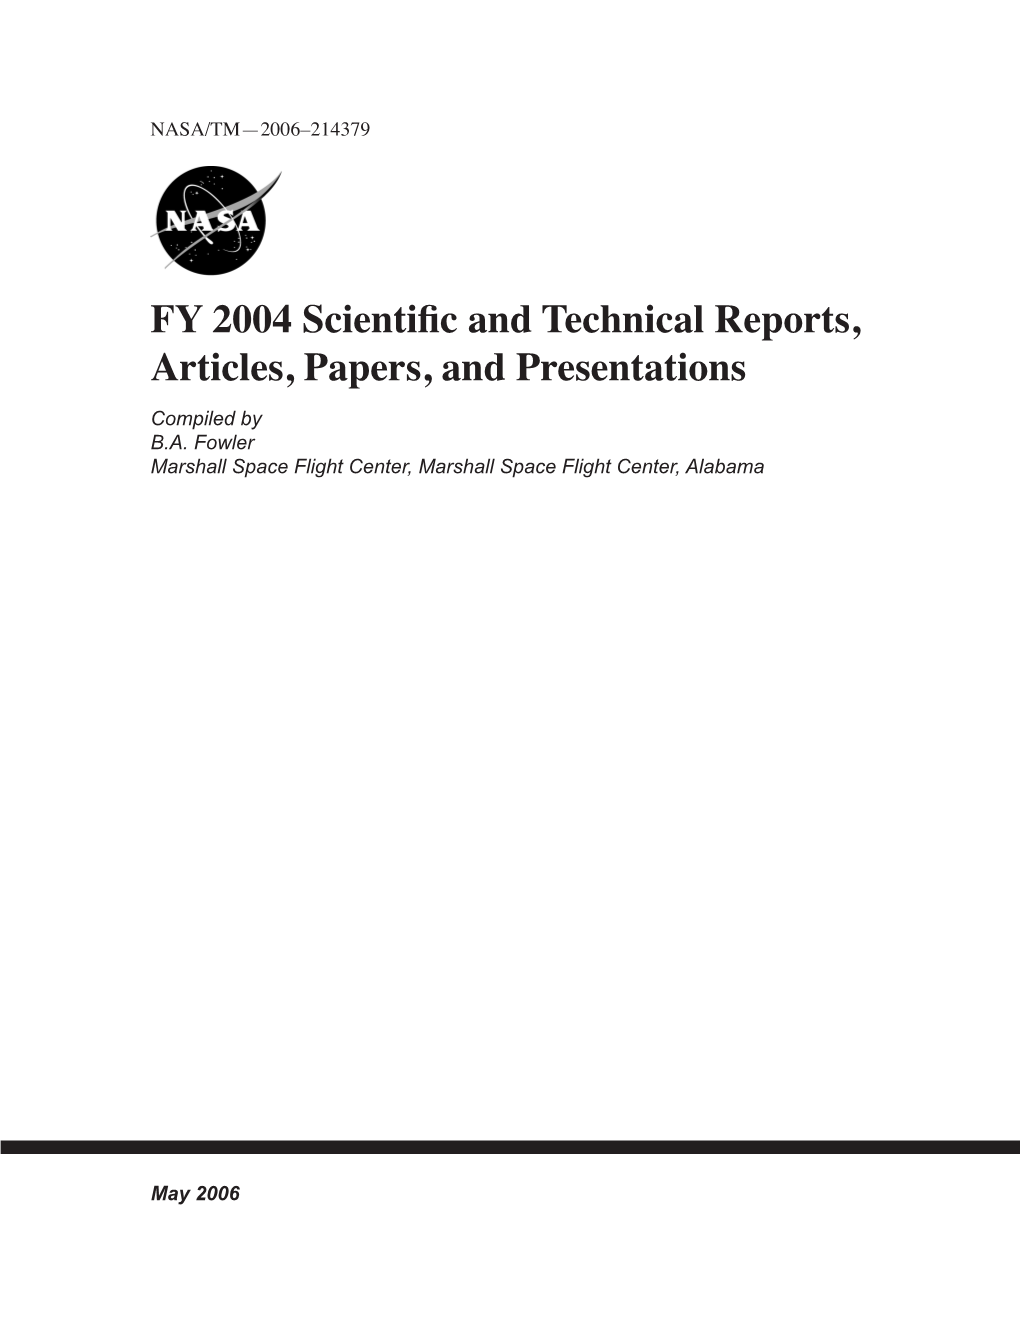 FY 2004 Scientific and Technical Reports, Articles, Papers, and Presentations Compiled by B.A